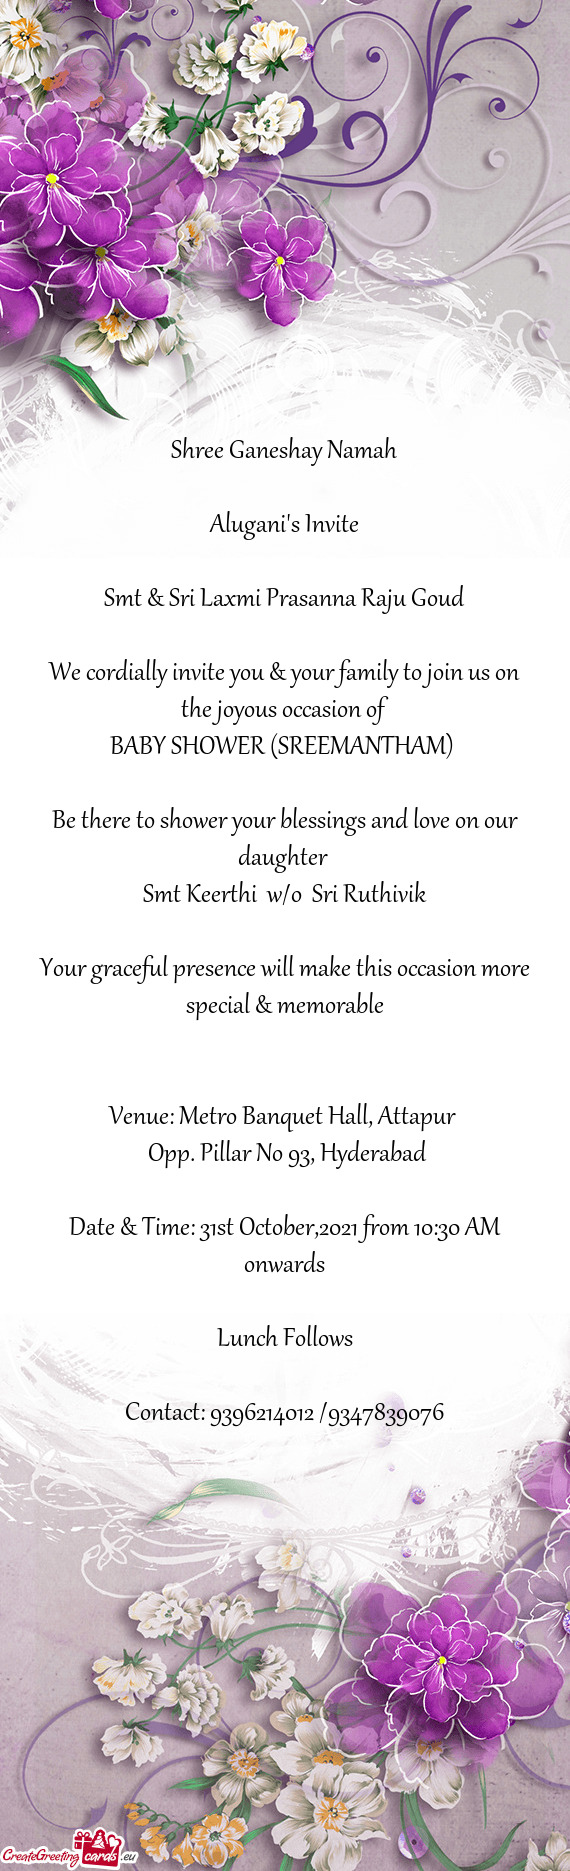 Be there to shower your blessings and love on our daughter